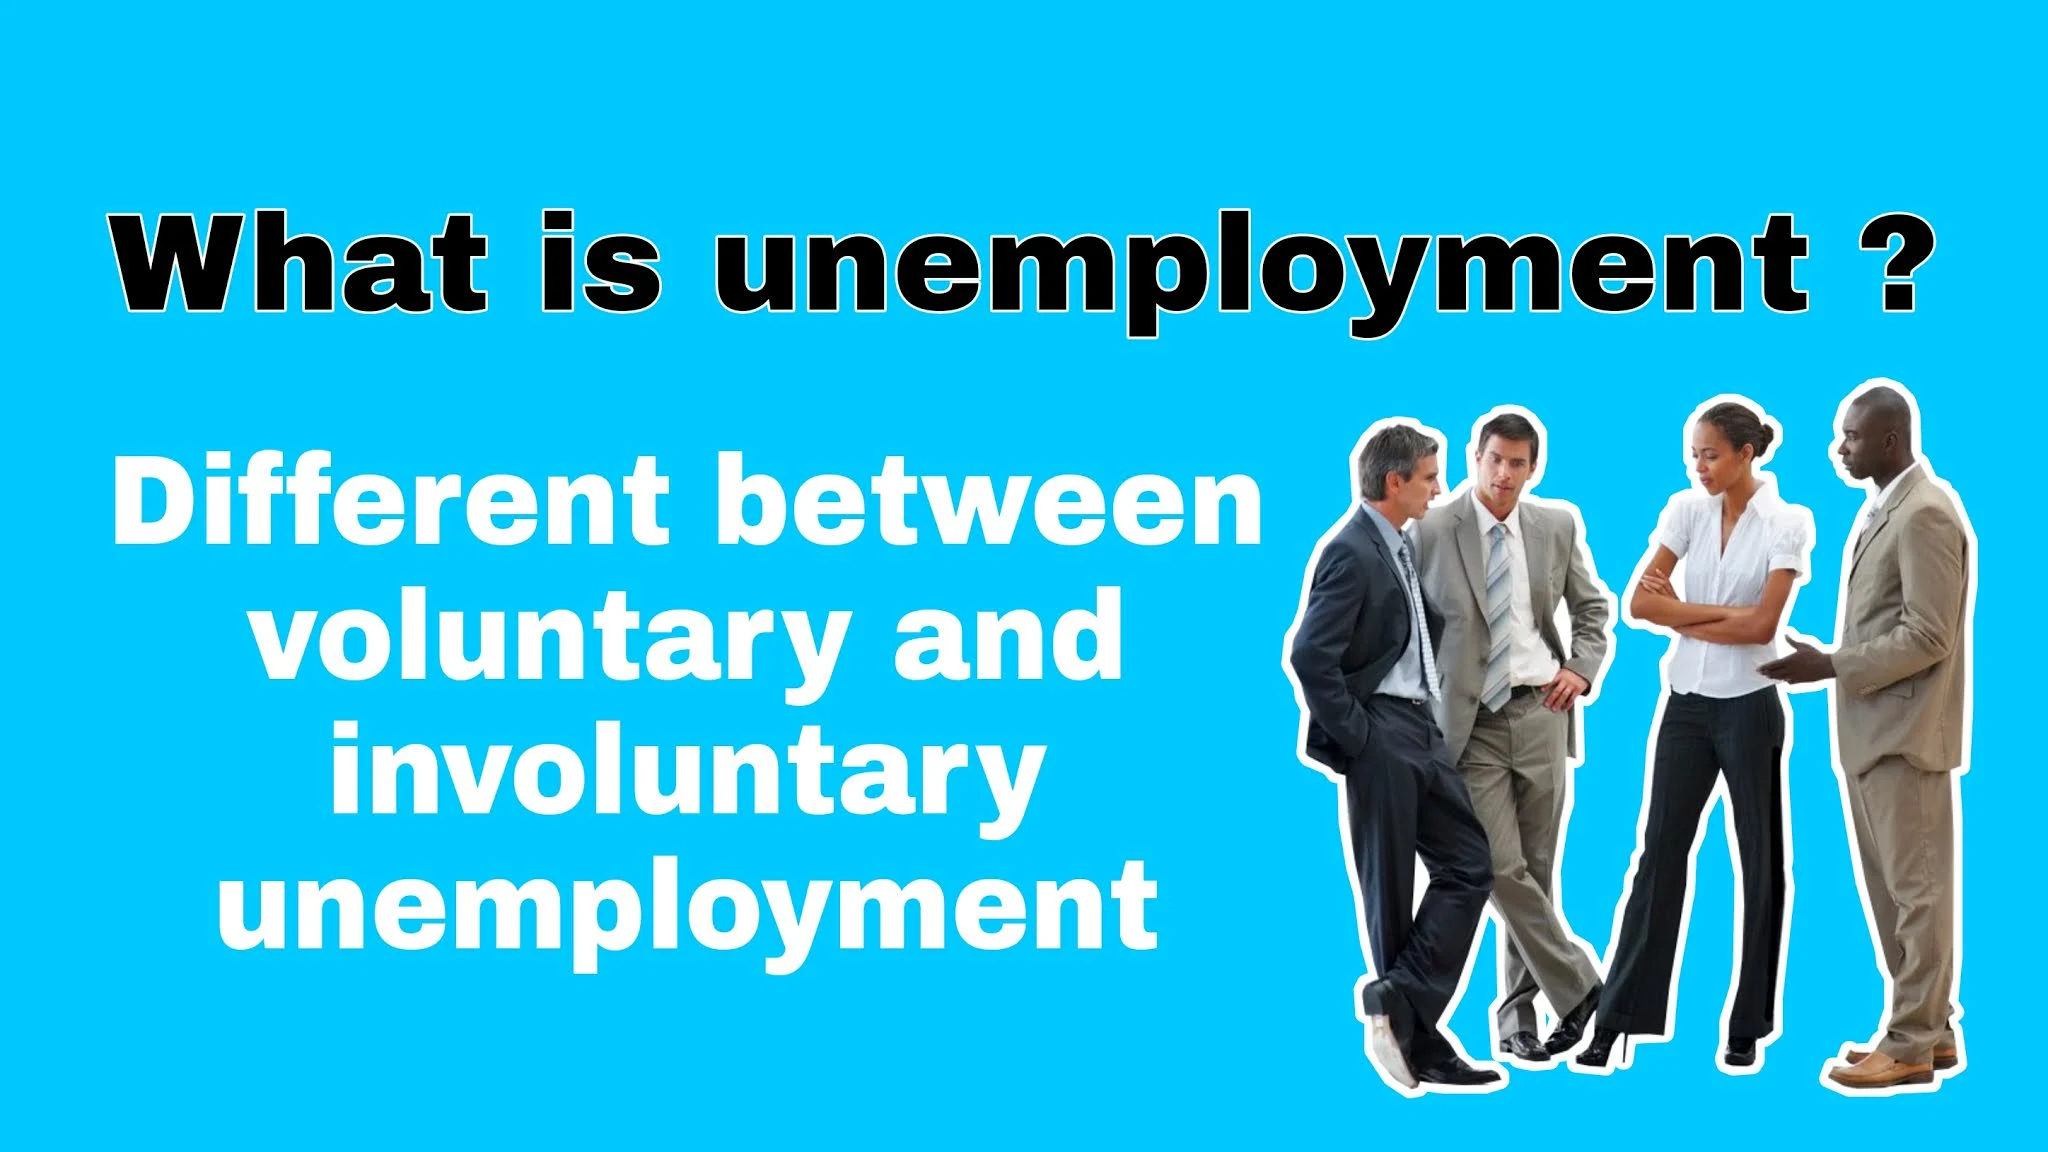 What is unemployment. Different between voluntary and involuntary unemployment